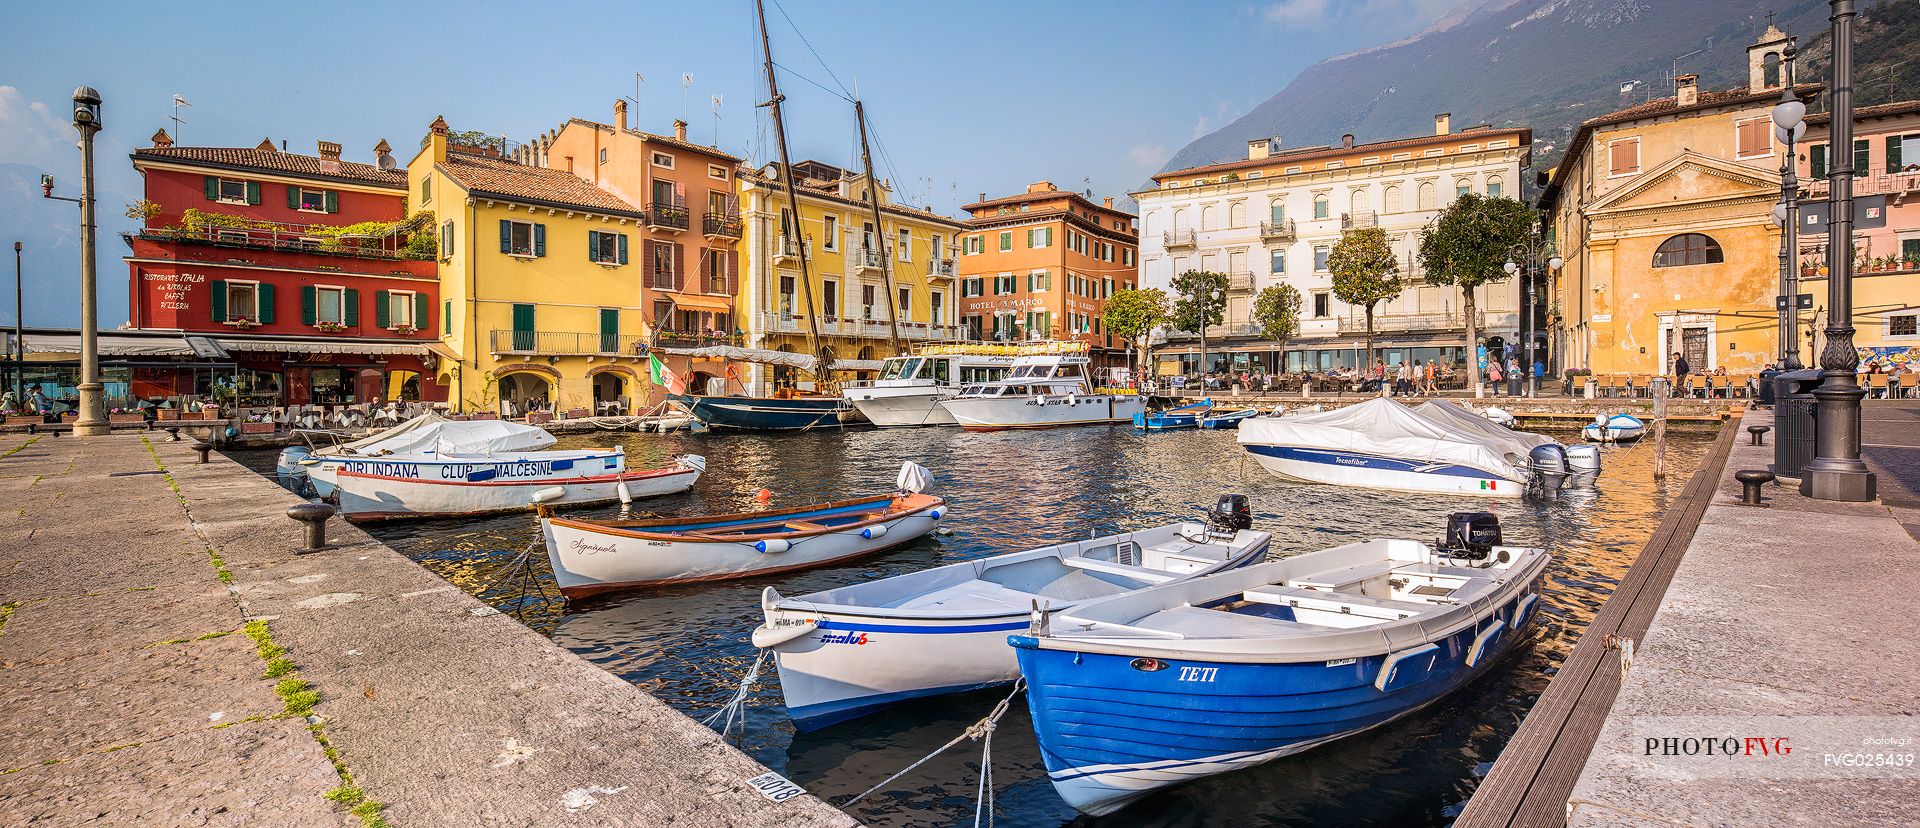 The picturesque village of Malcesine on Garda lake, Italy